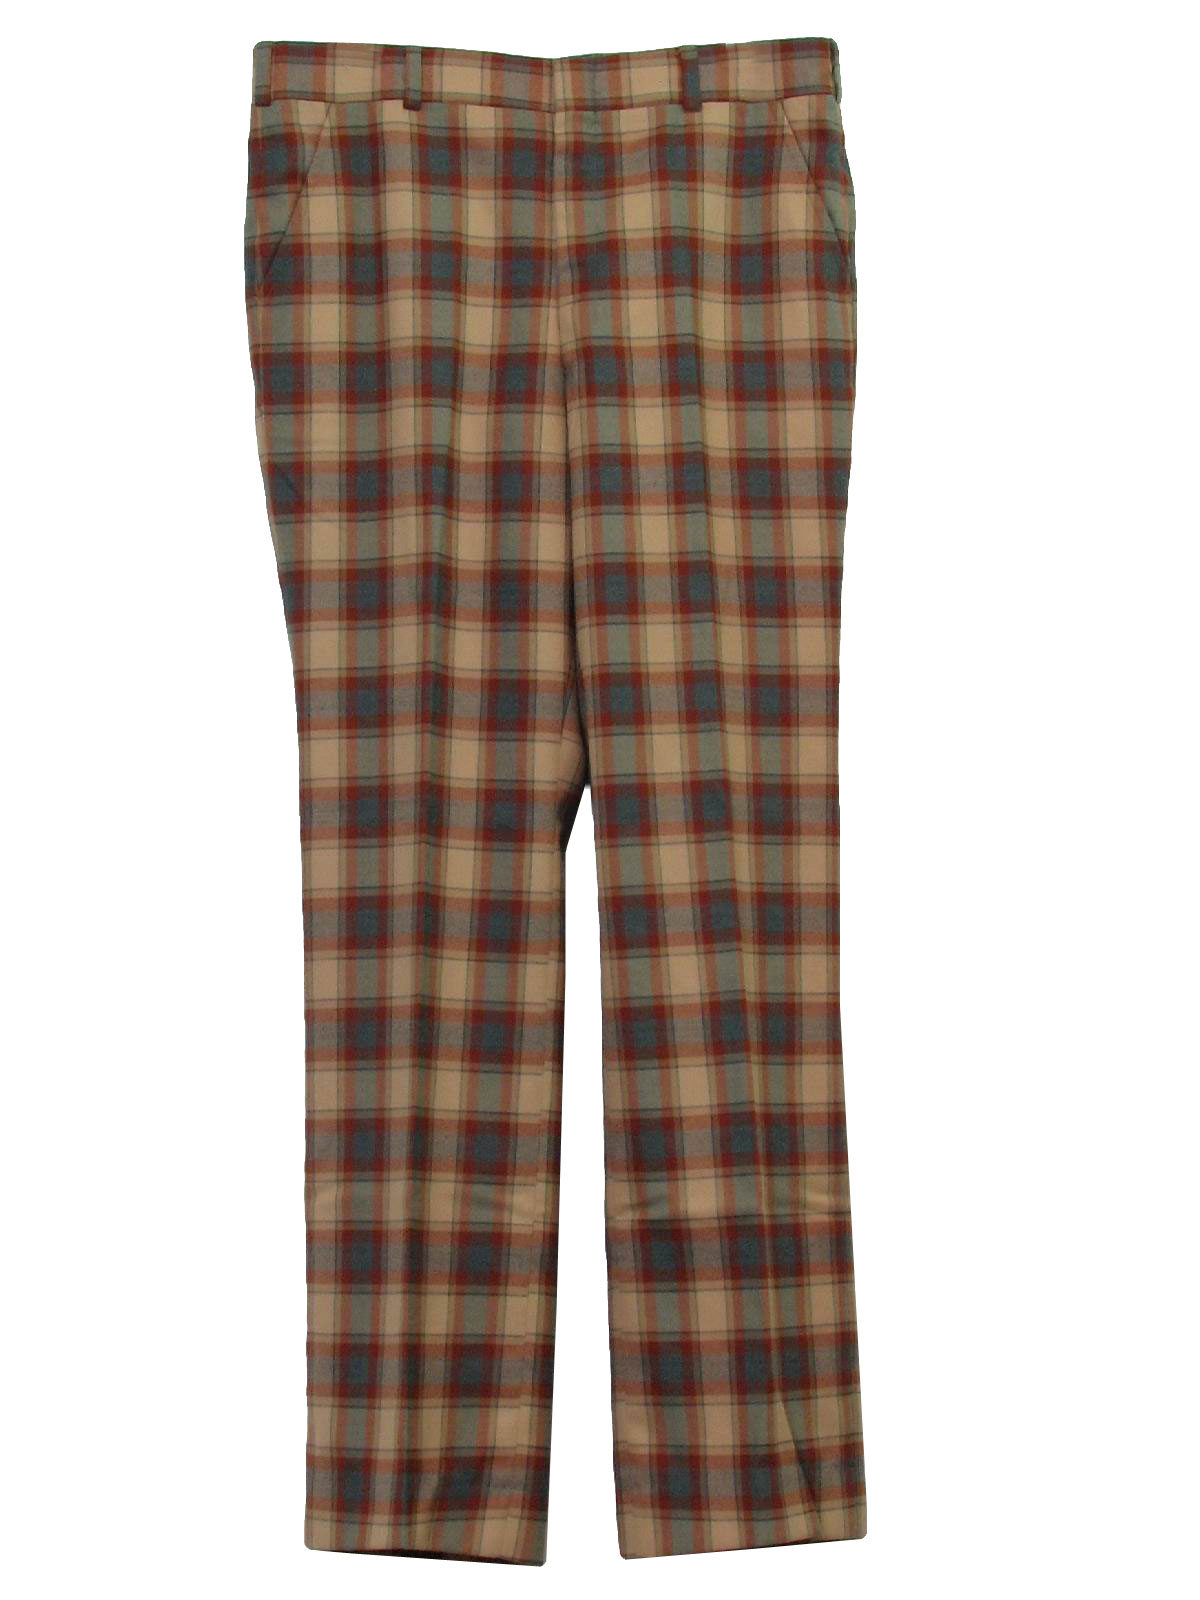 Vintage Coffees Seventies Pants: 70s -Coffees- Mens tan, rust and dull ...